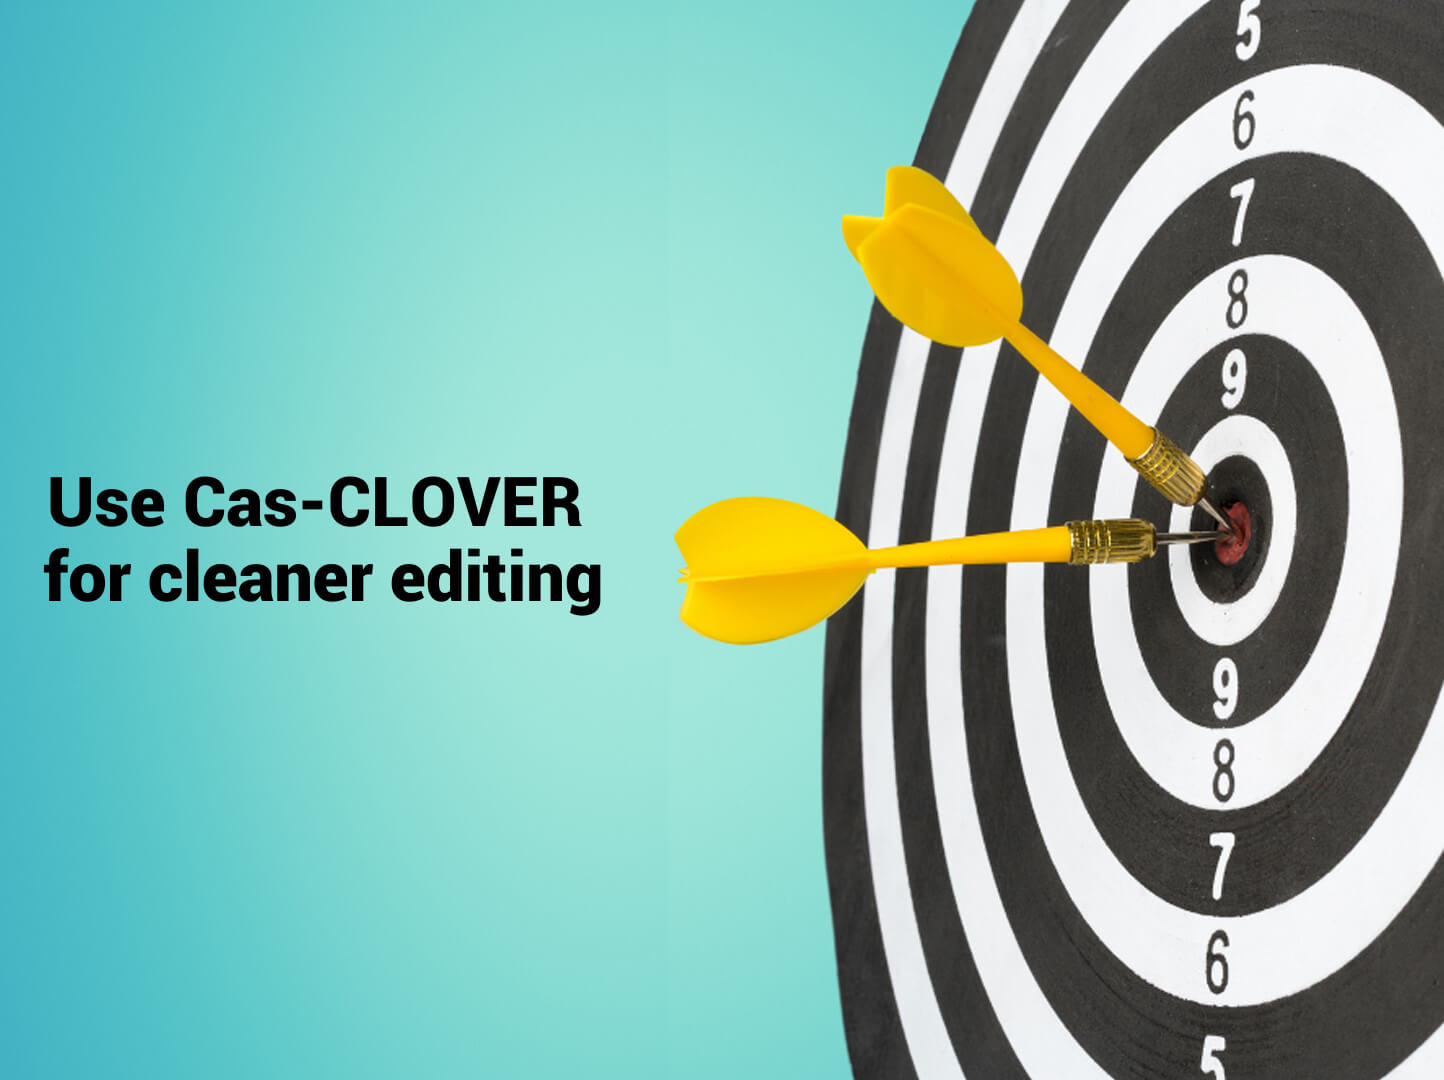 dart board and text “Use Cas-CLOVER for cleaner editing” (1370 x 1024)